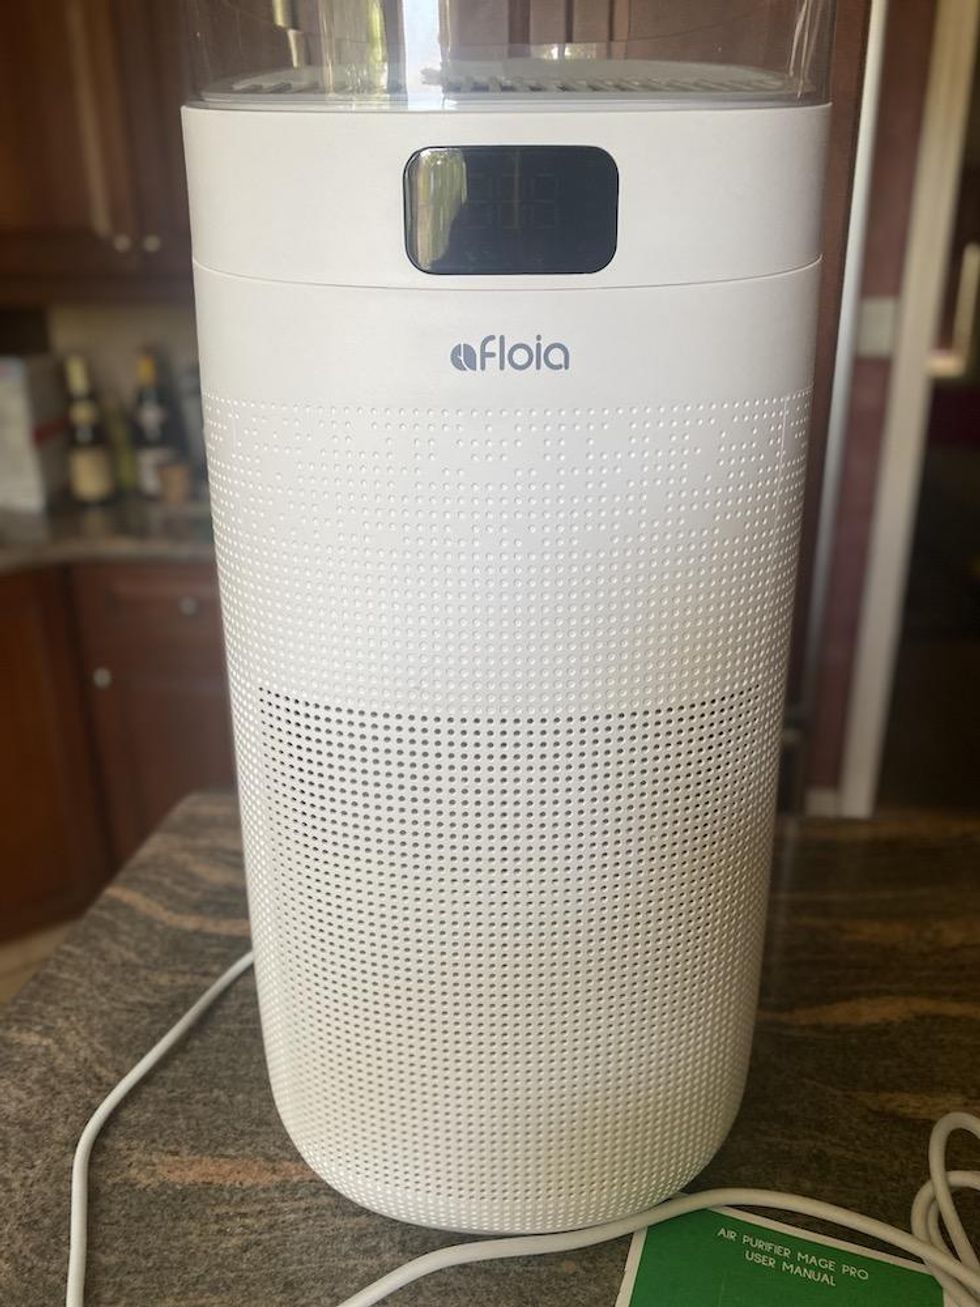 a photo of Afloia smart air purifier unboxed